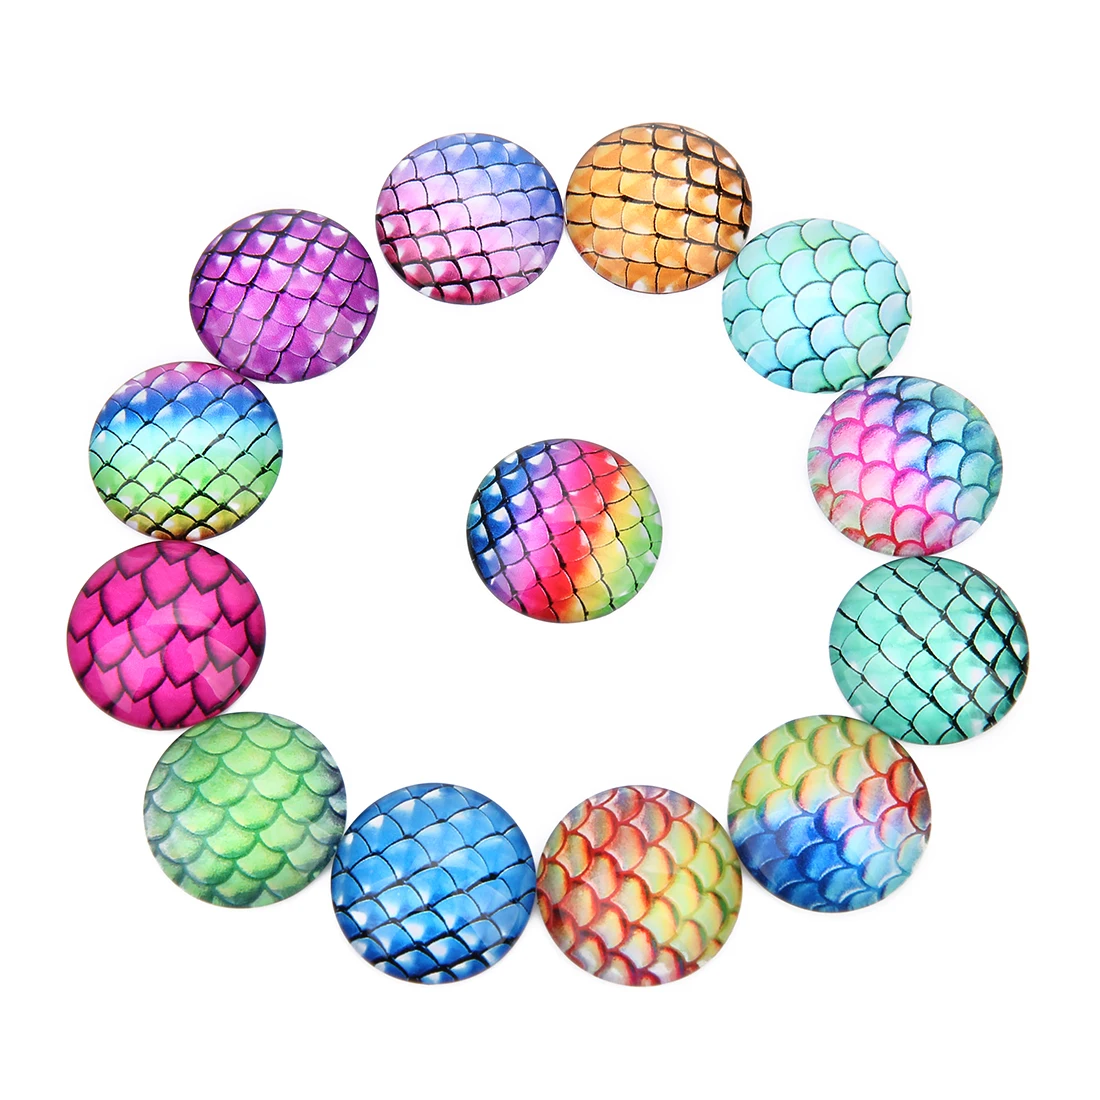 

10 20Mm Cabochons Beads Color fish scales ring face Rings Custom Glass Cabochon For Rings Making Fashion Diy Jewelry Supplies, Multicolor